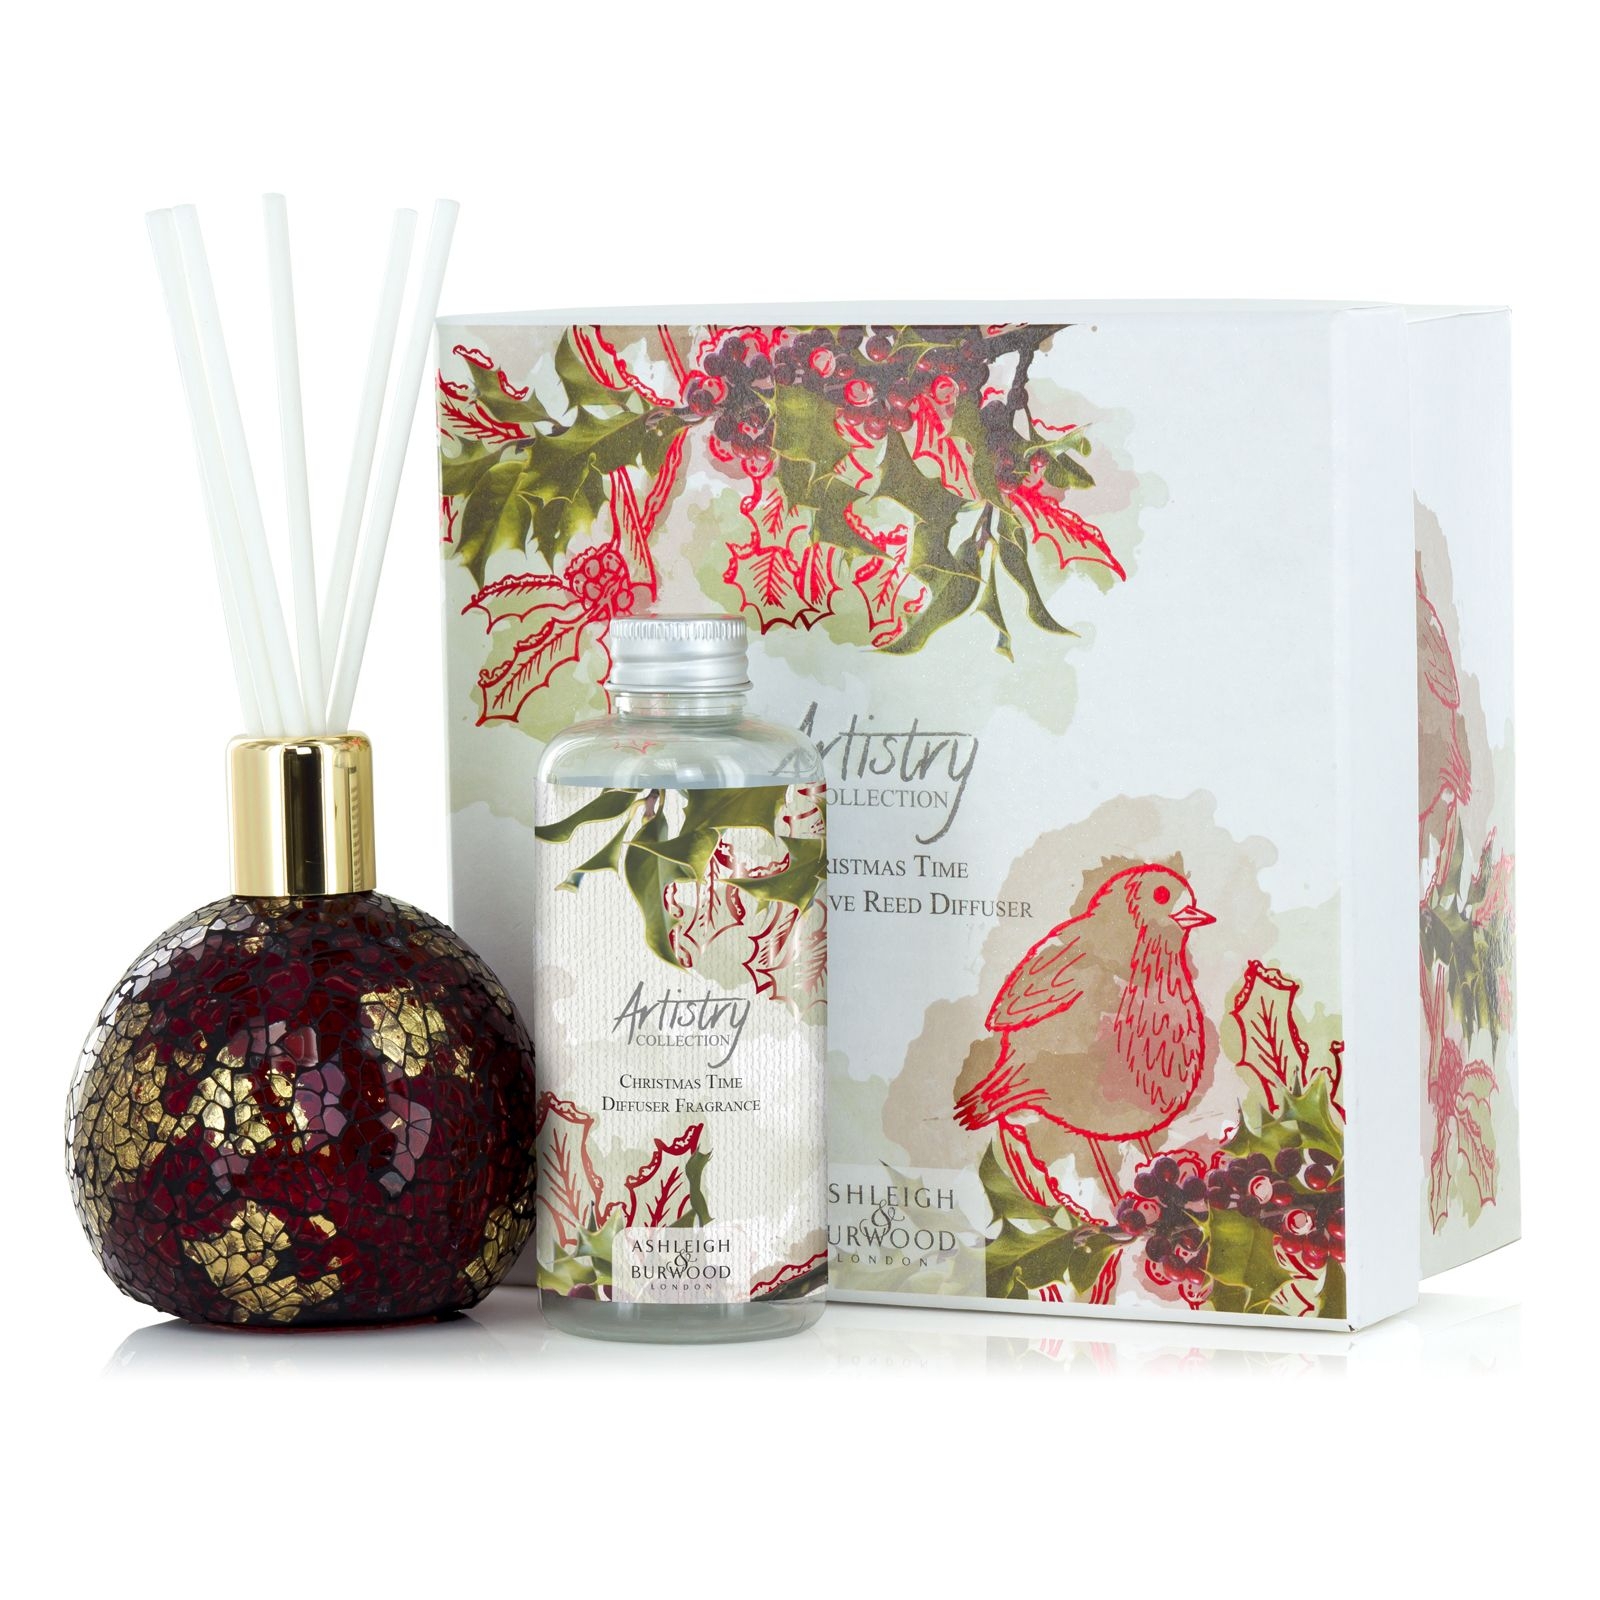 Artistry Christmas Time Set Diffuser 180ml